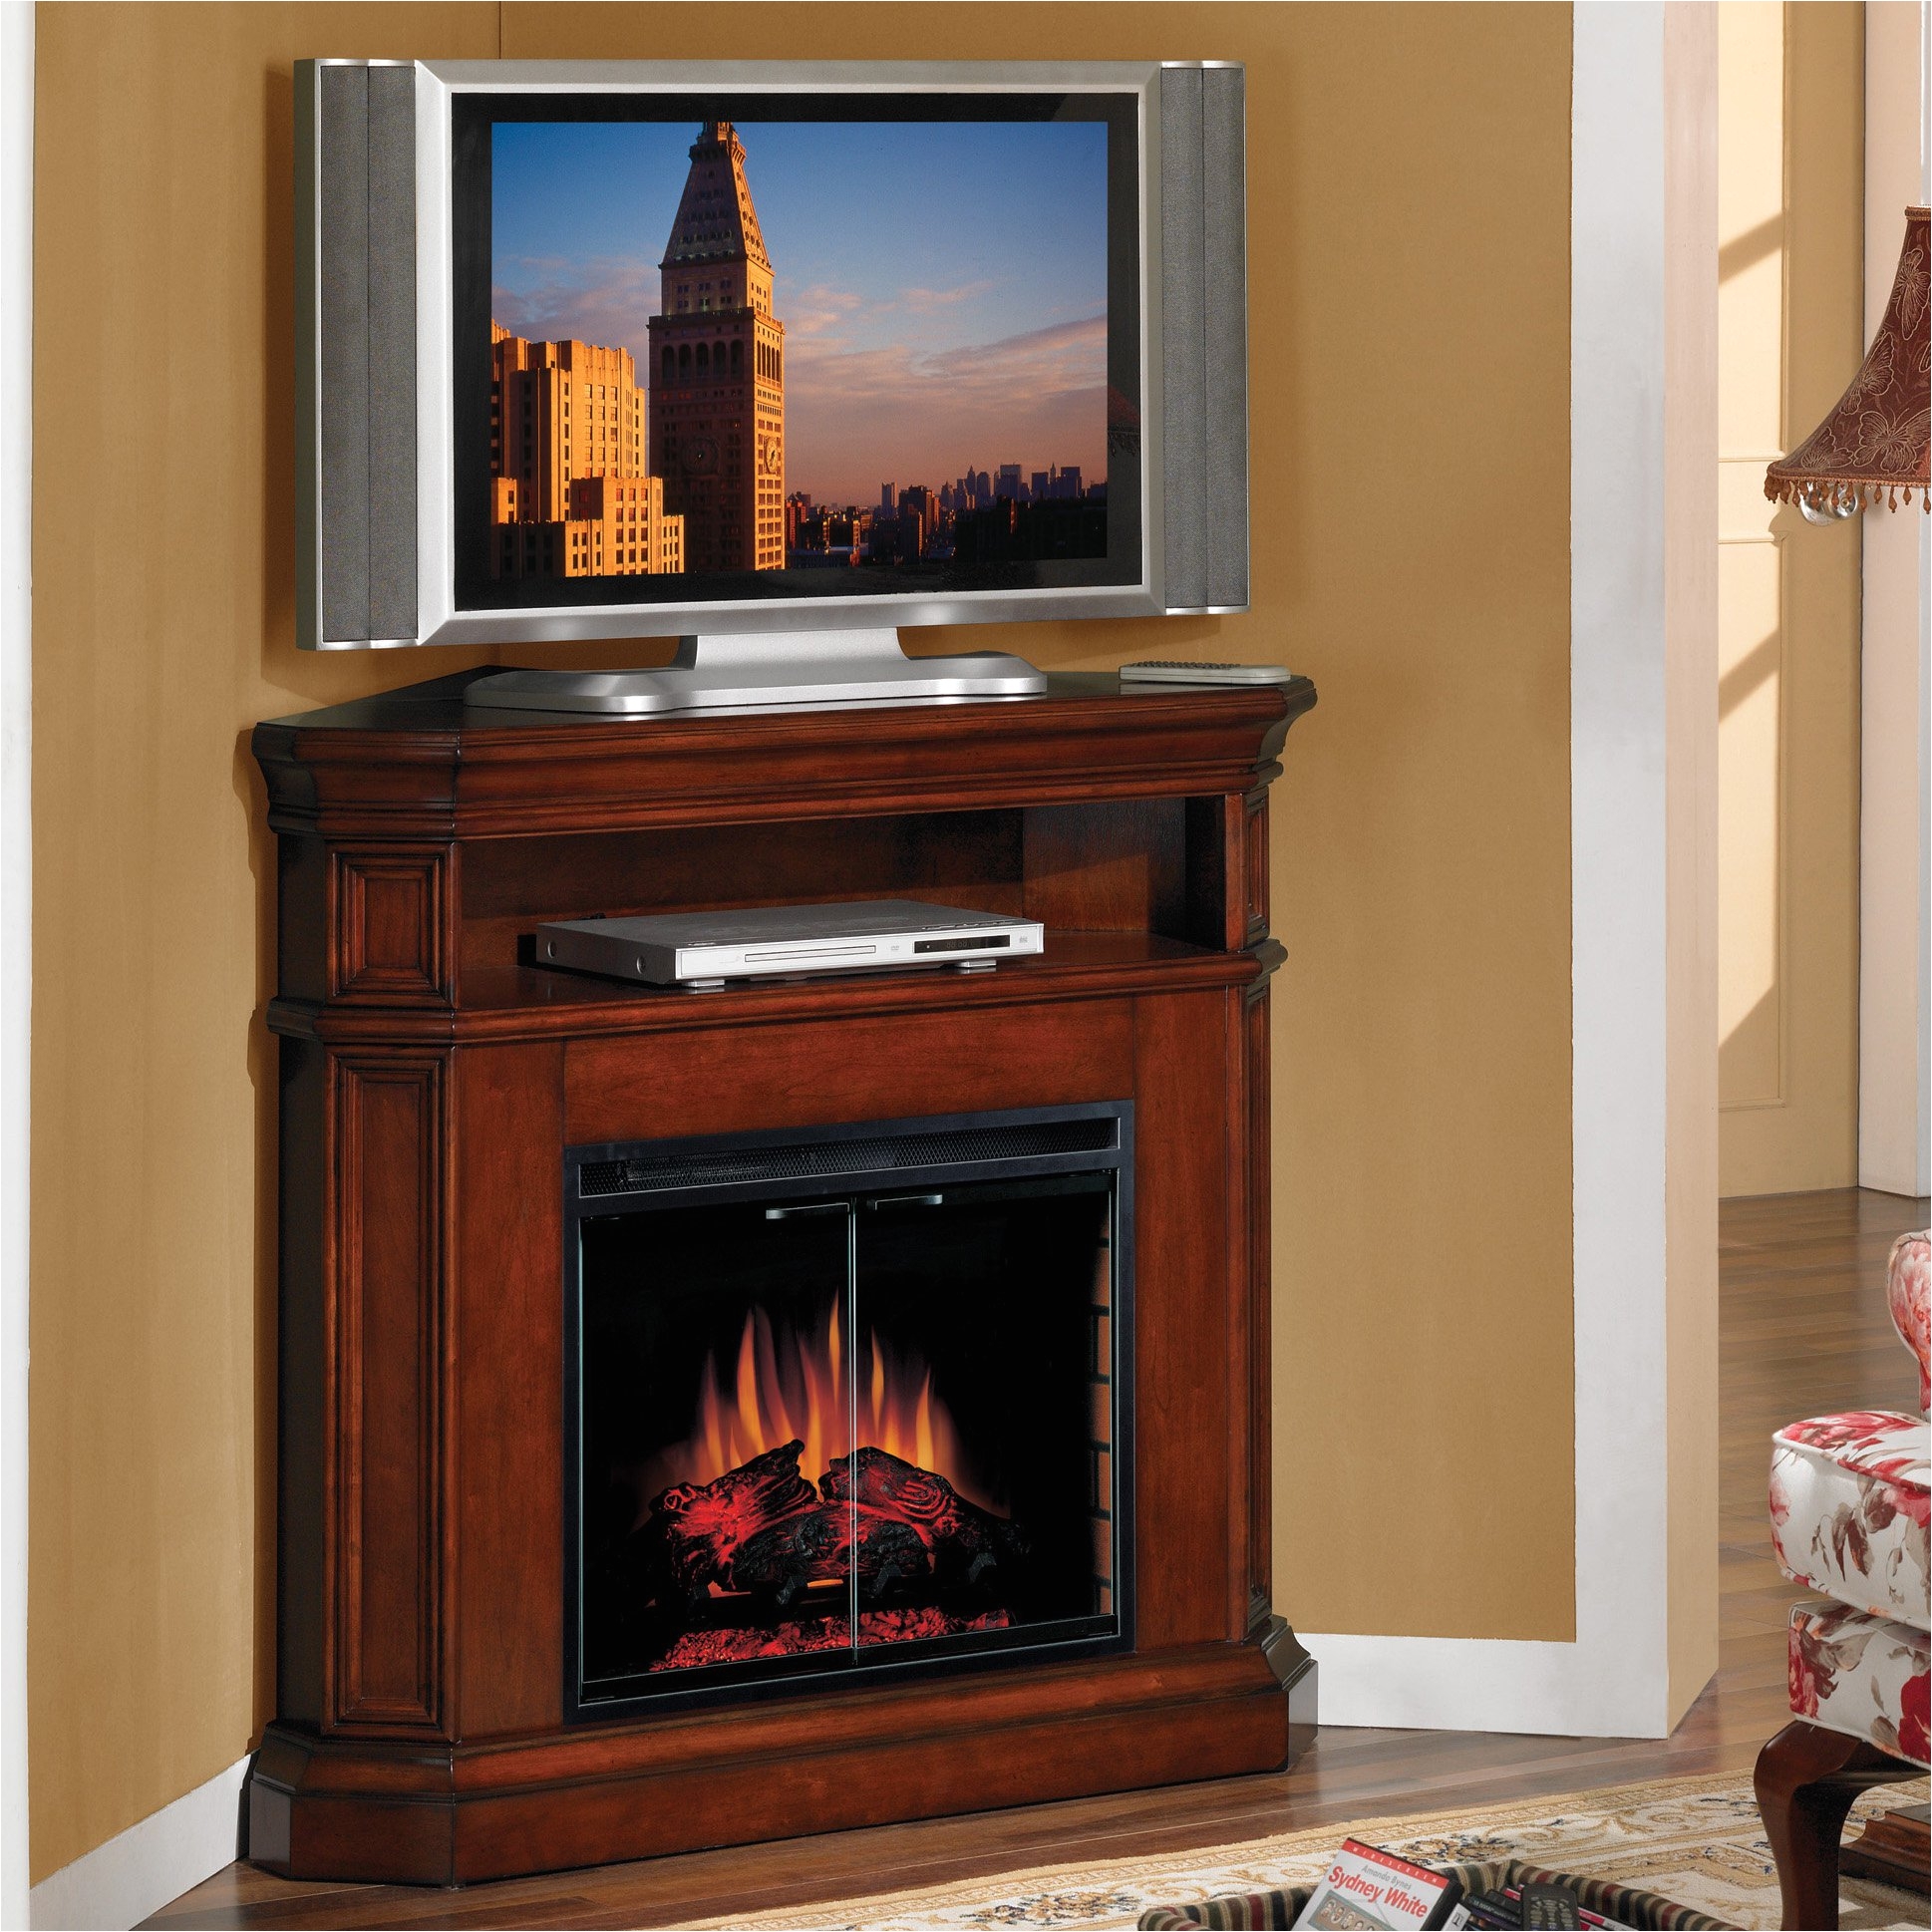 Big Lots Electric Fireplace Review Best Of Big Lots Fireplace Corner Electric Fireplace Corner Tv Stand